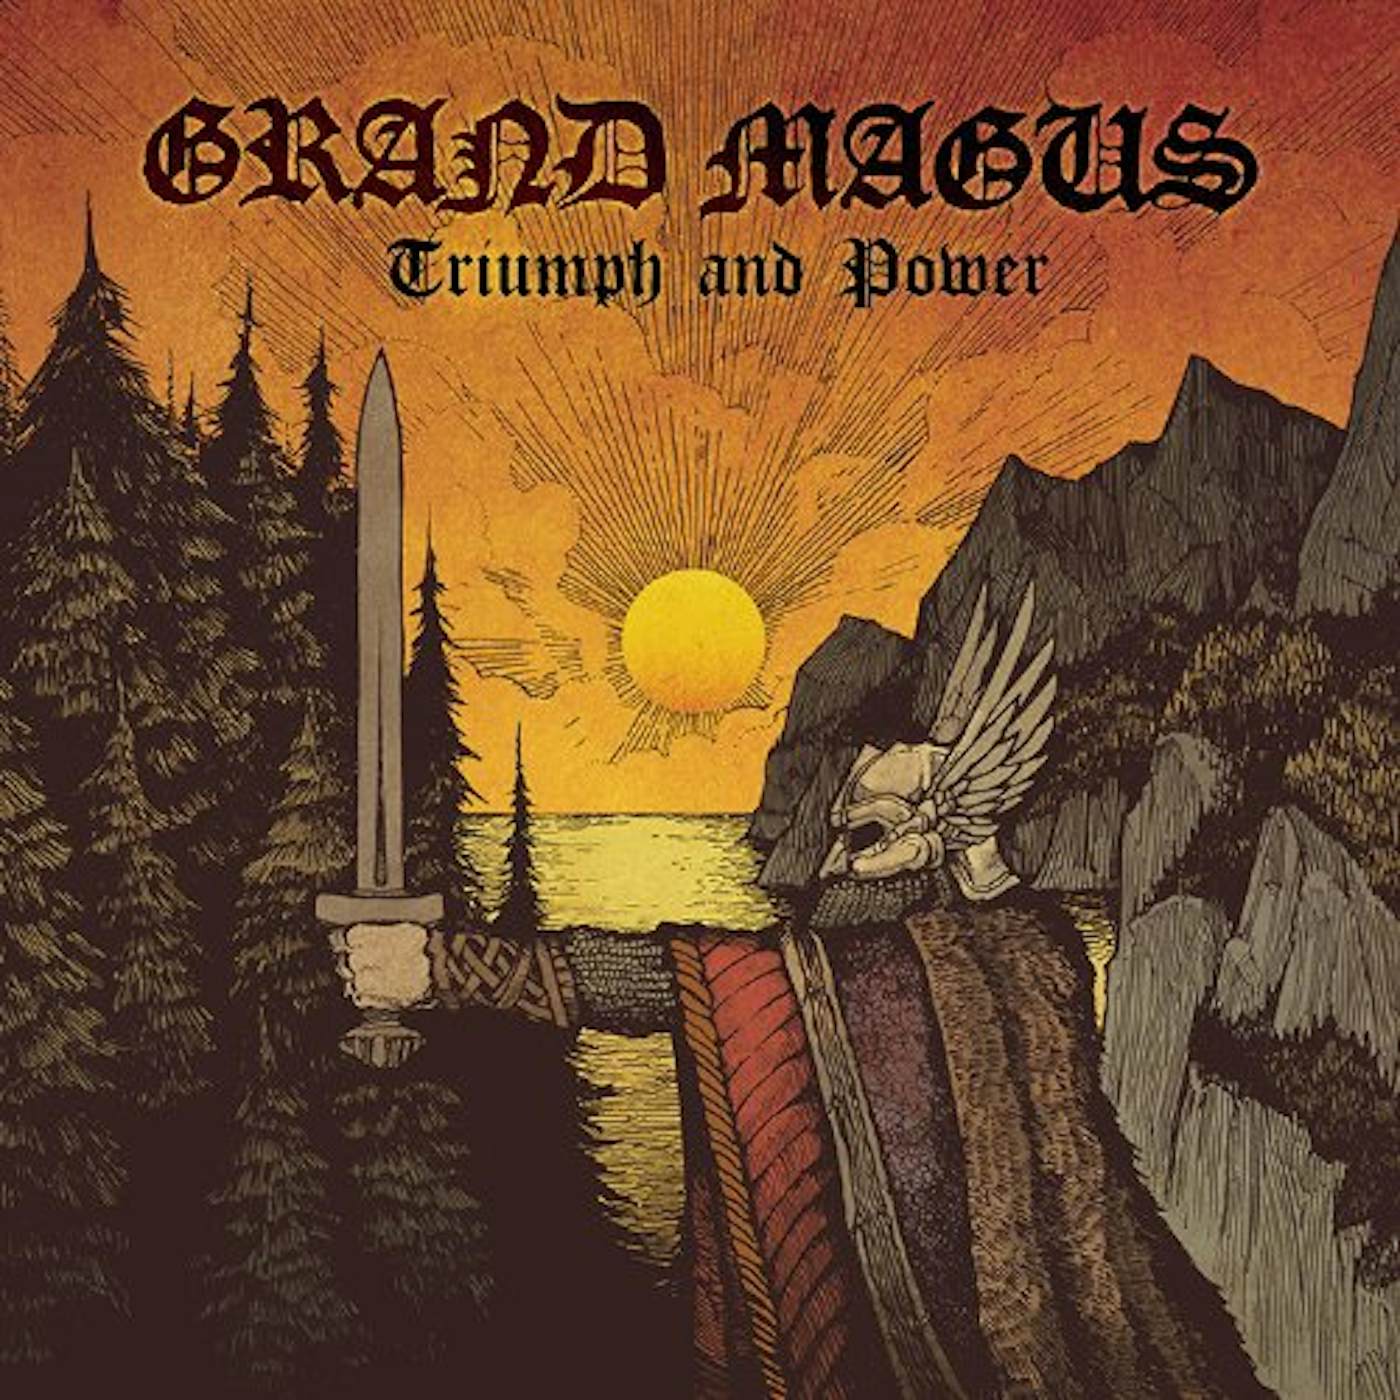 Grand Magus Triumph and Power Vinyl Record